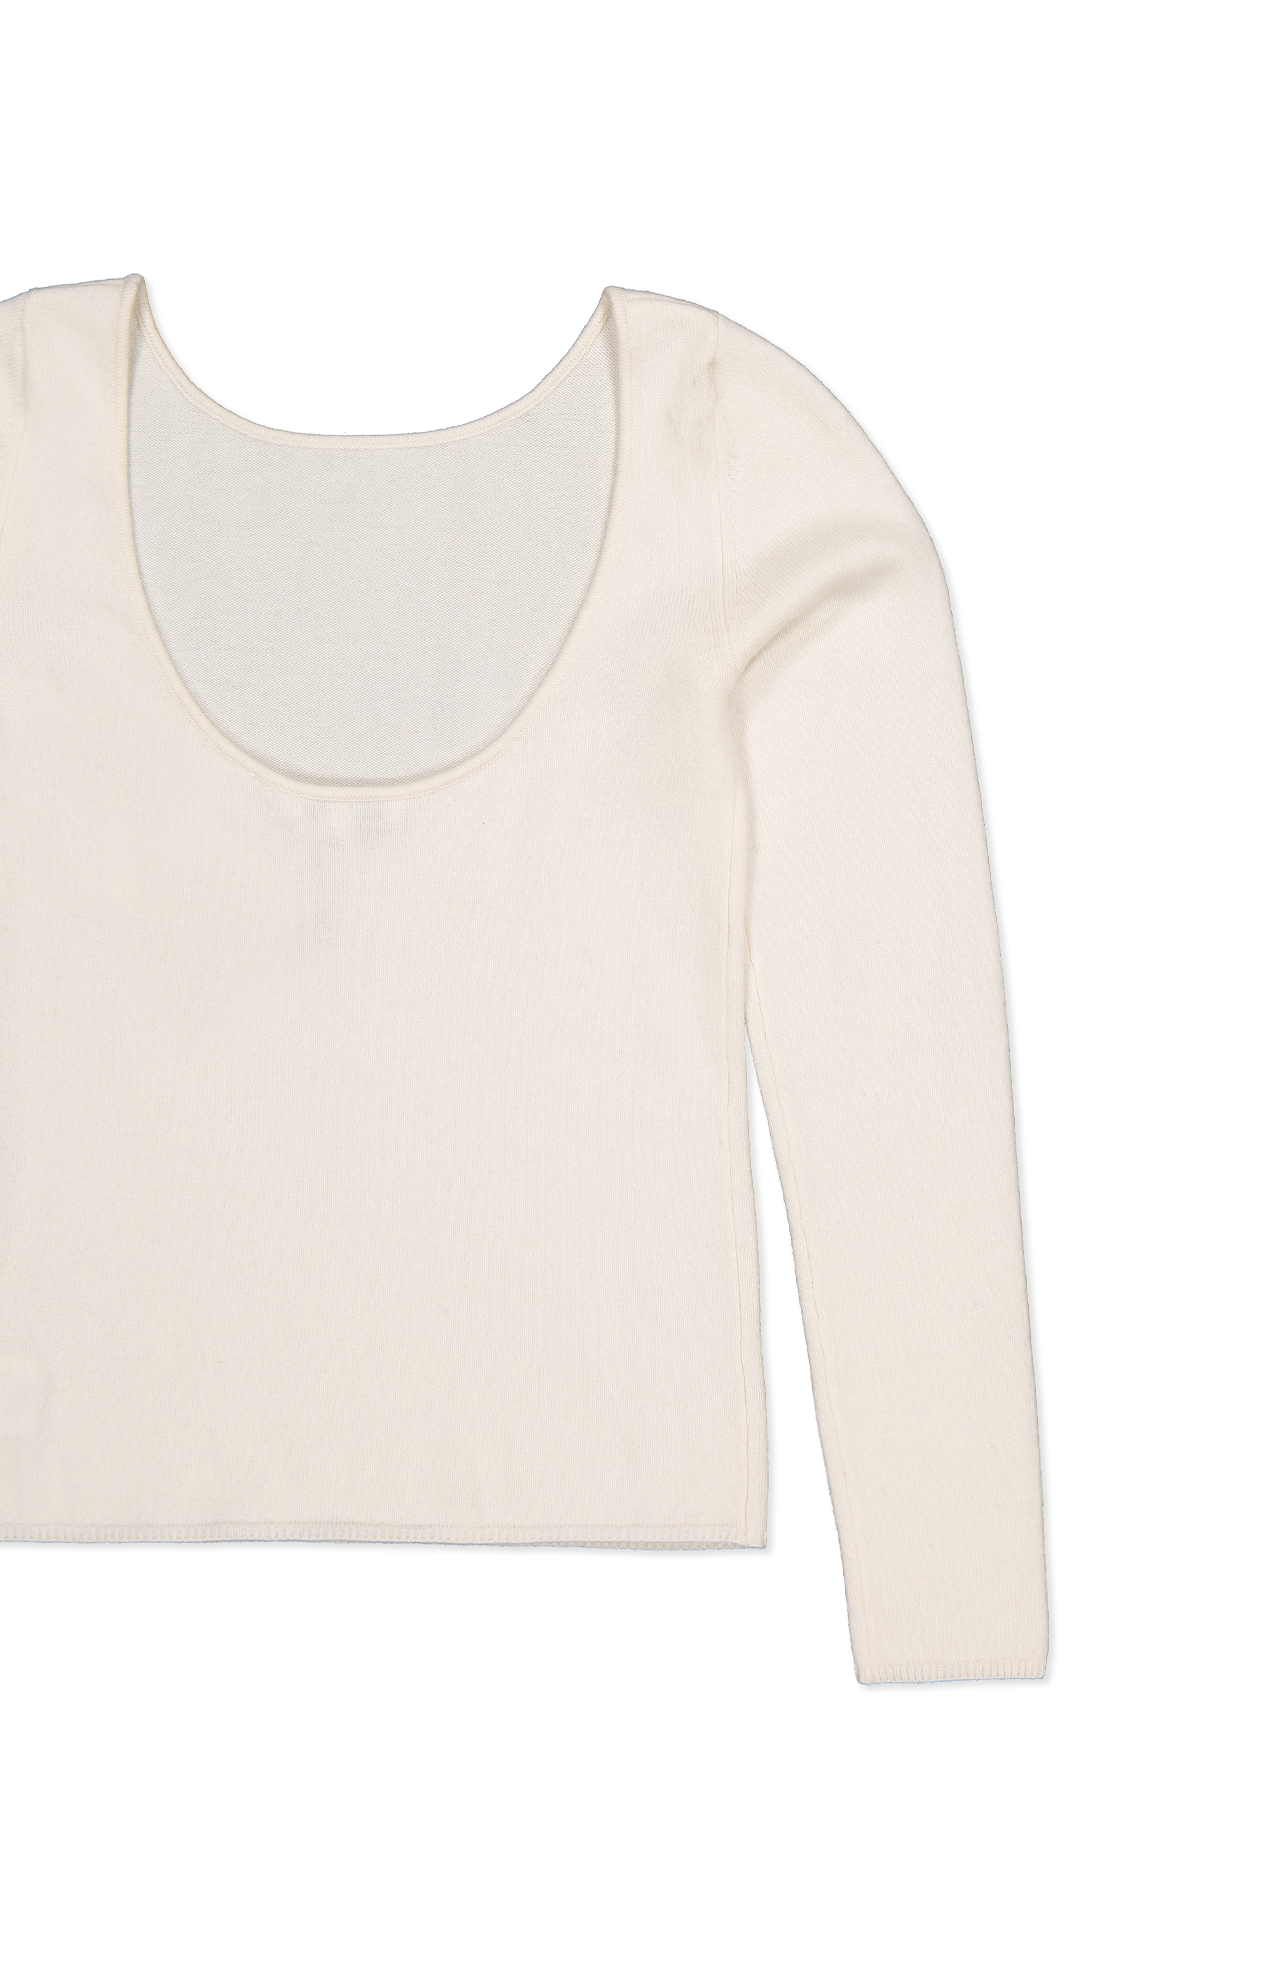 White And Warren Cashmere Ballet Neck Top White Back Flat Lay Image (6989306888307)